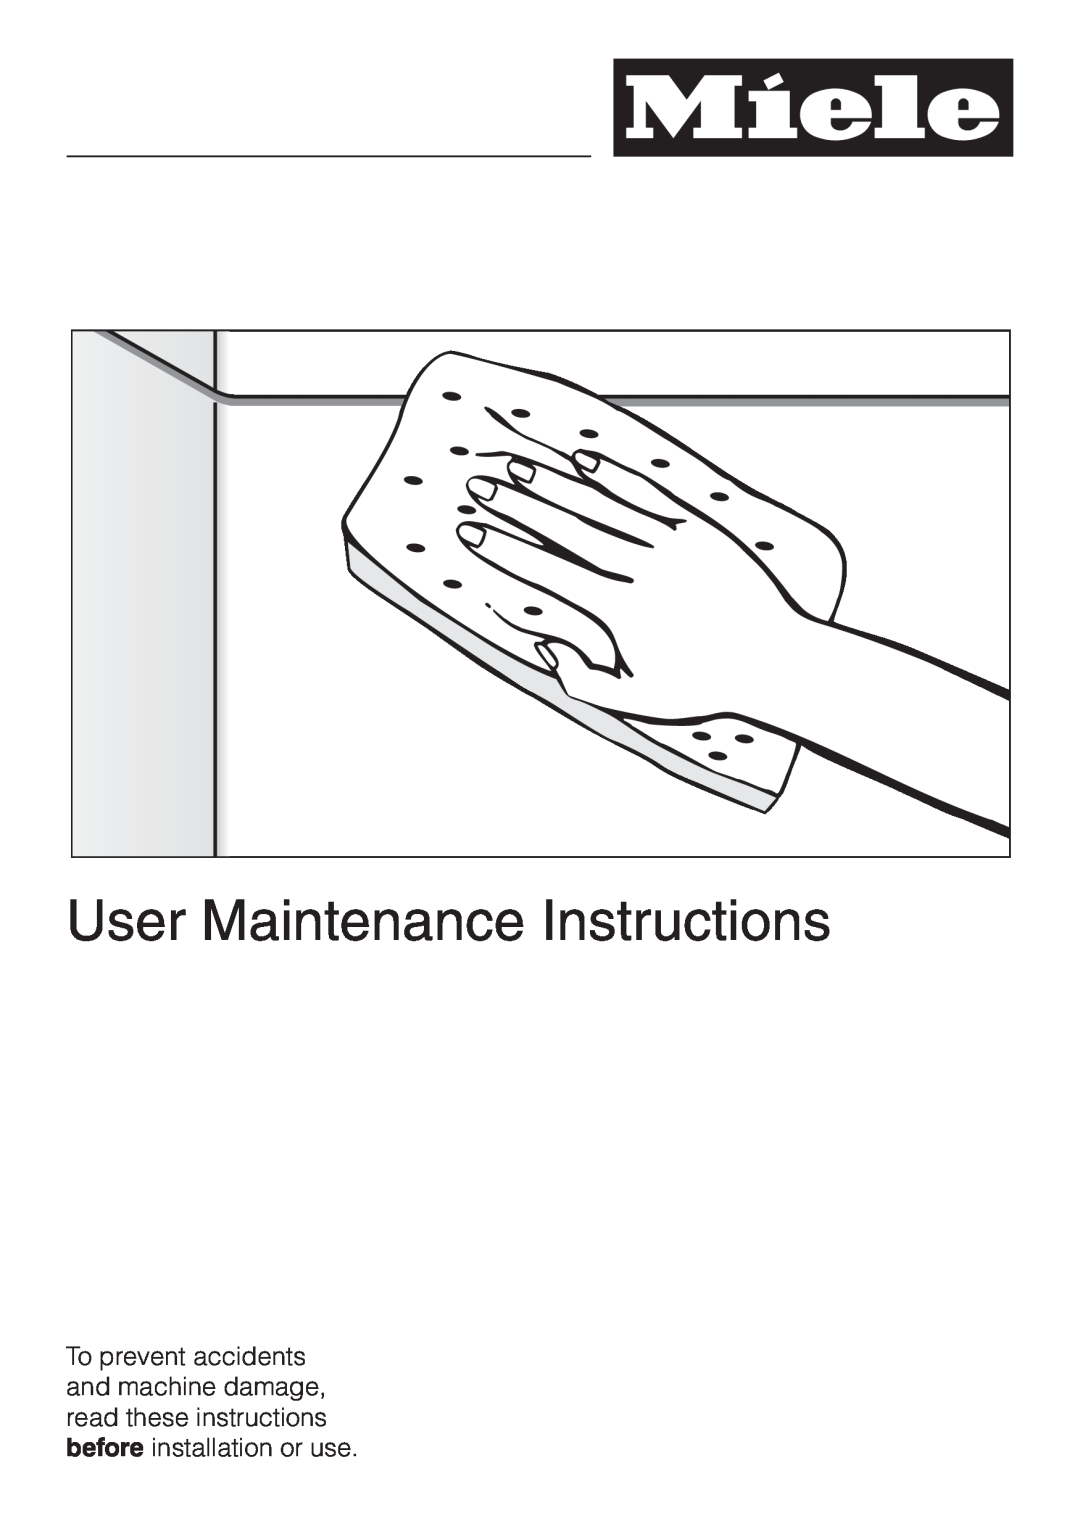 Miele HG01 operating instructions User Maintenance Instructions 